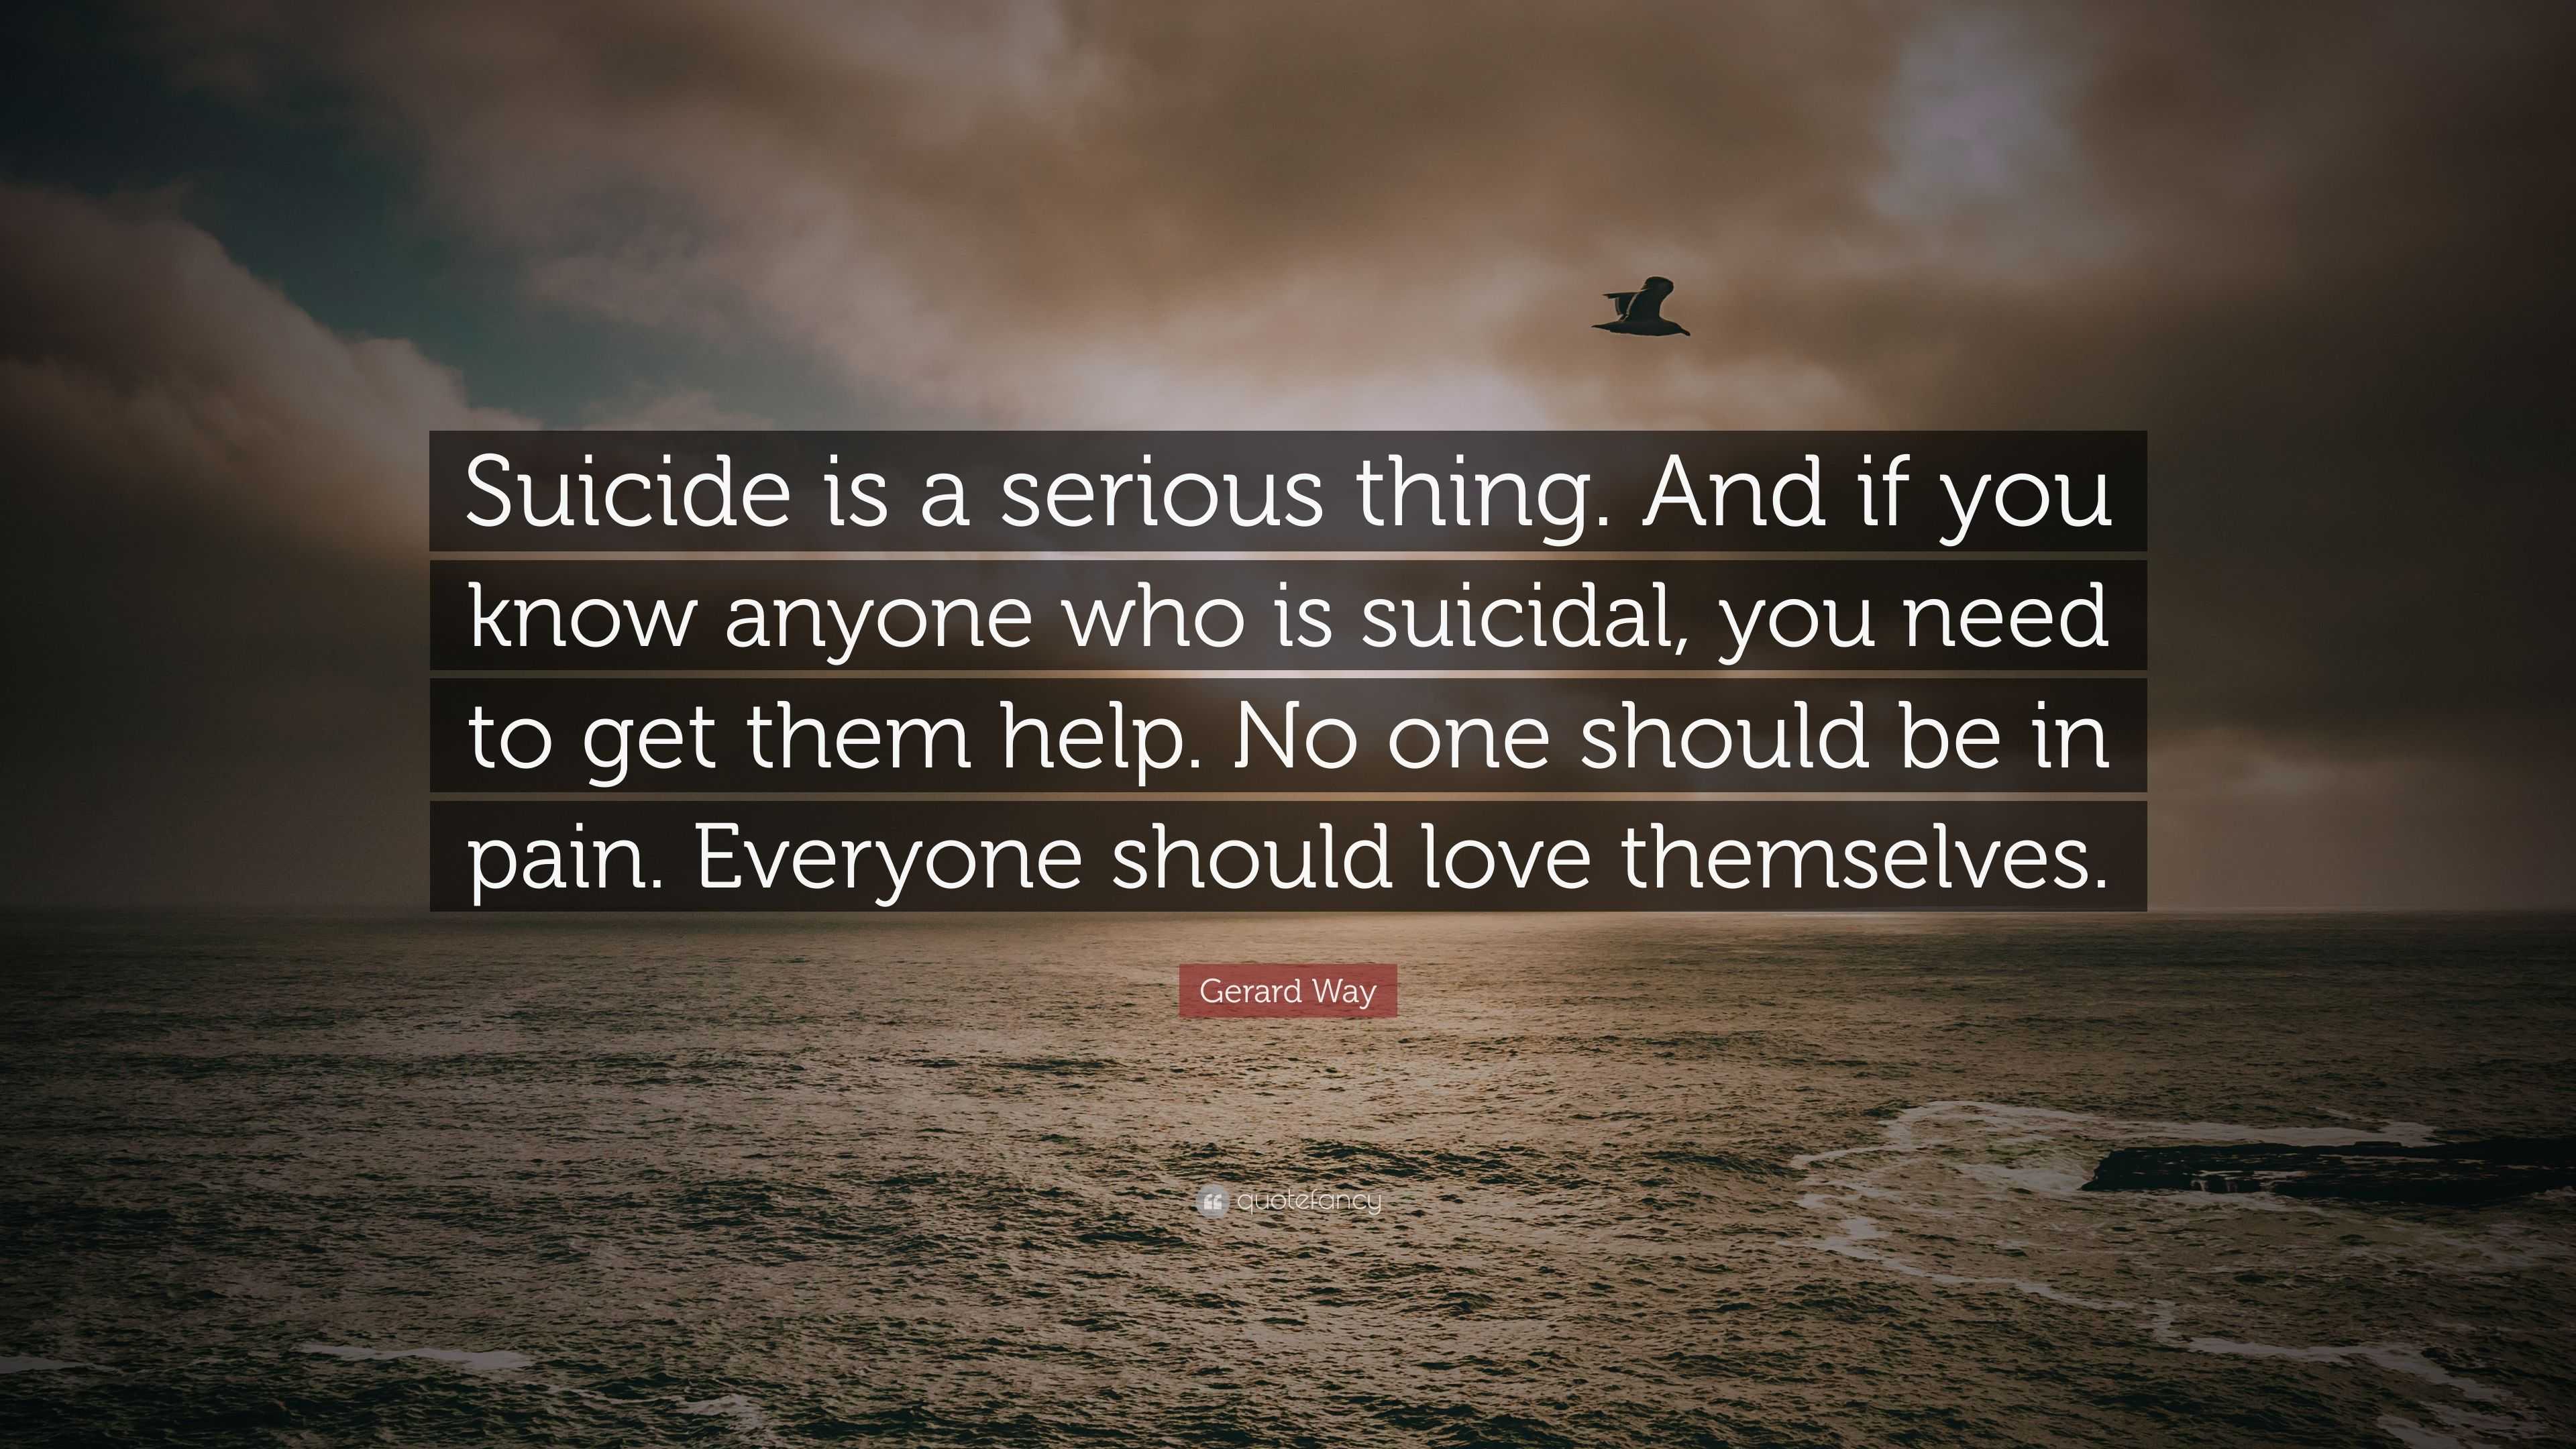 Gerard Way Quote: “Suicide is a serious thing. And if you know anyone